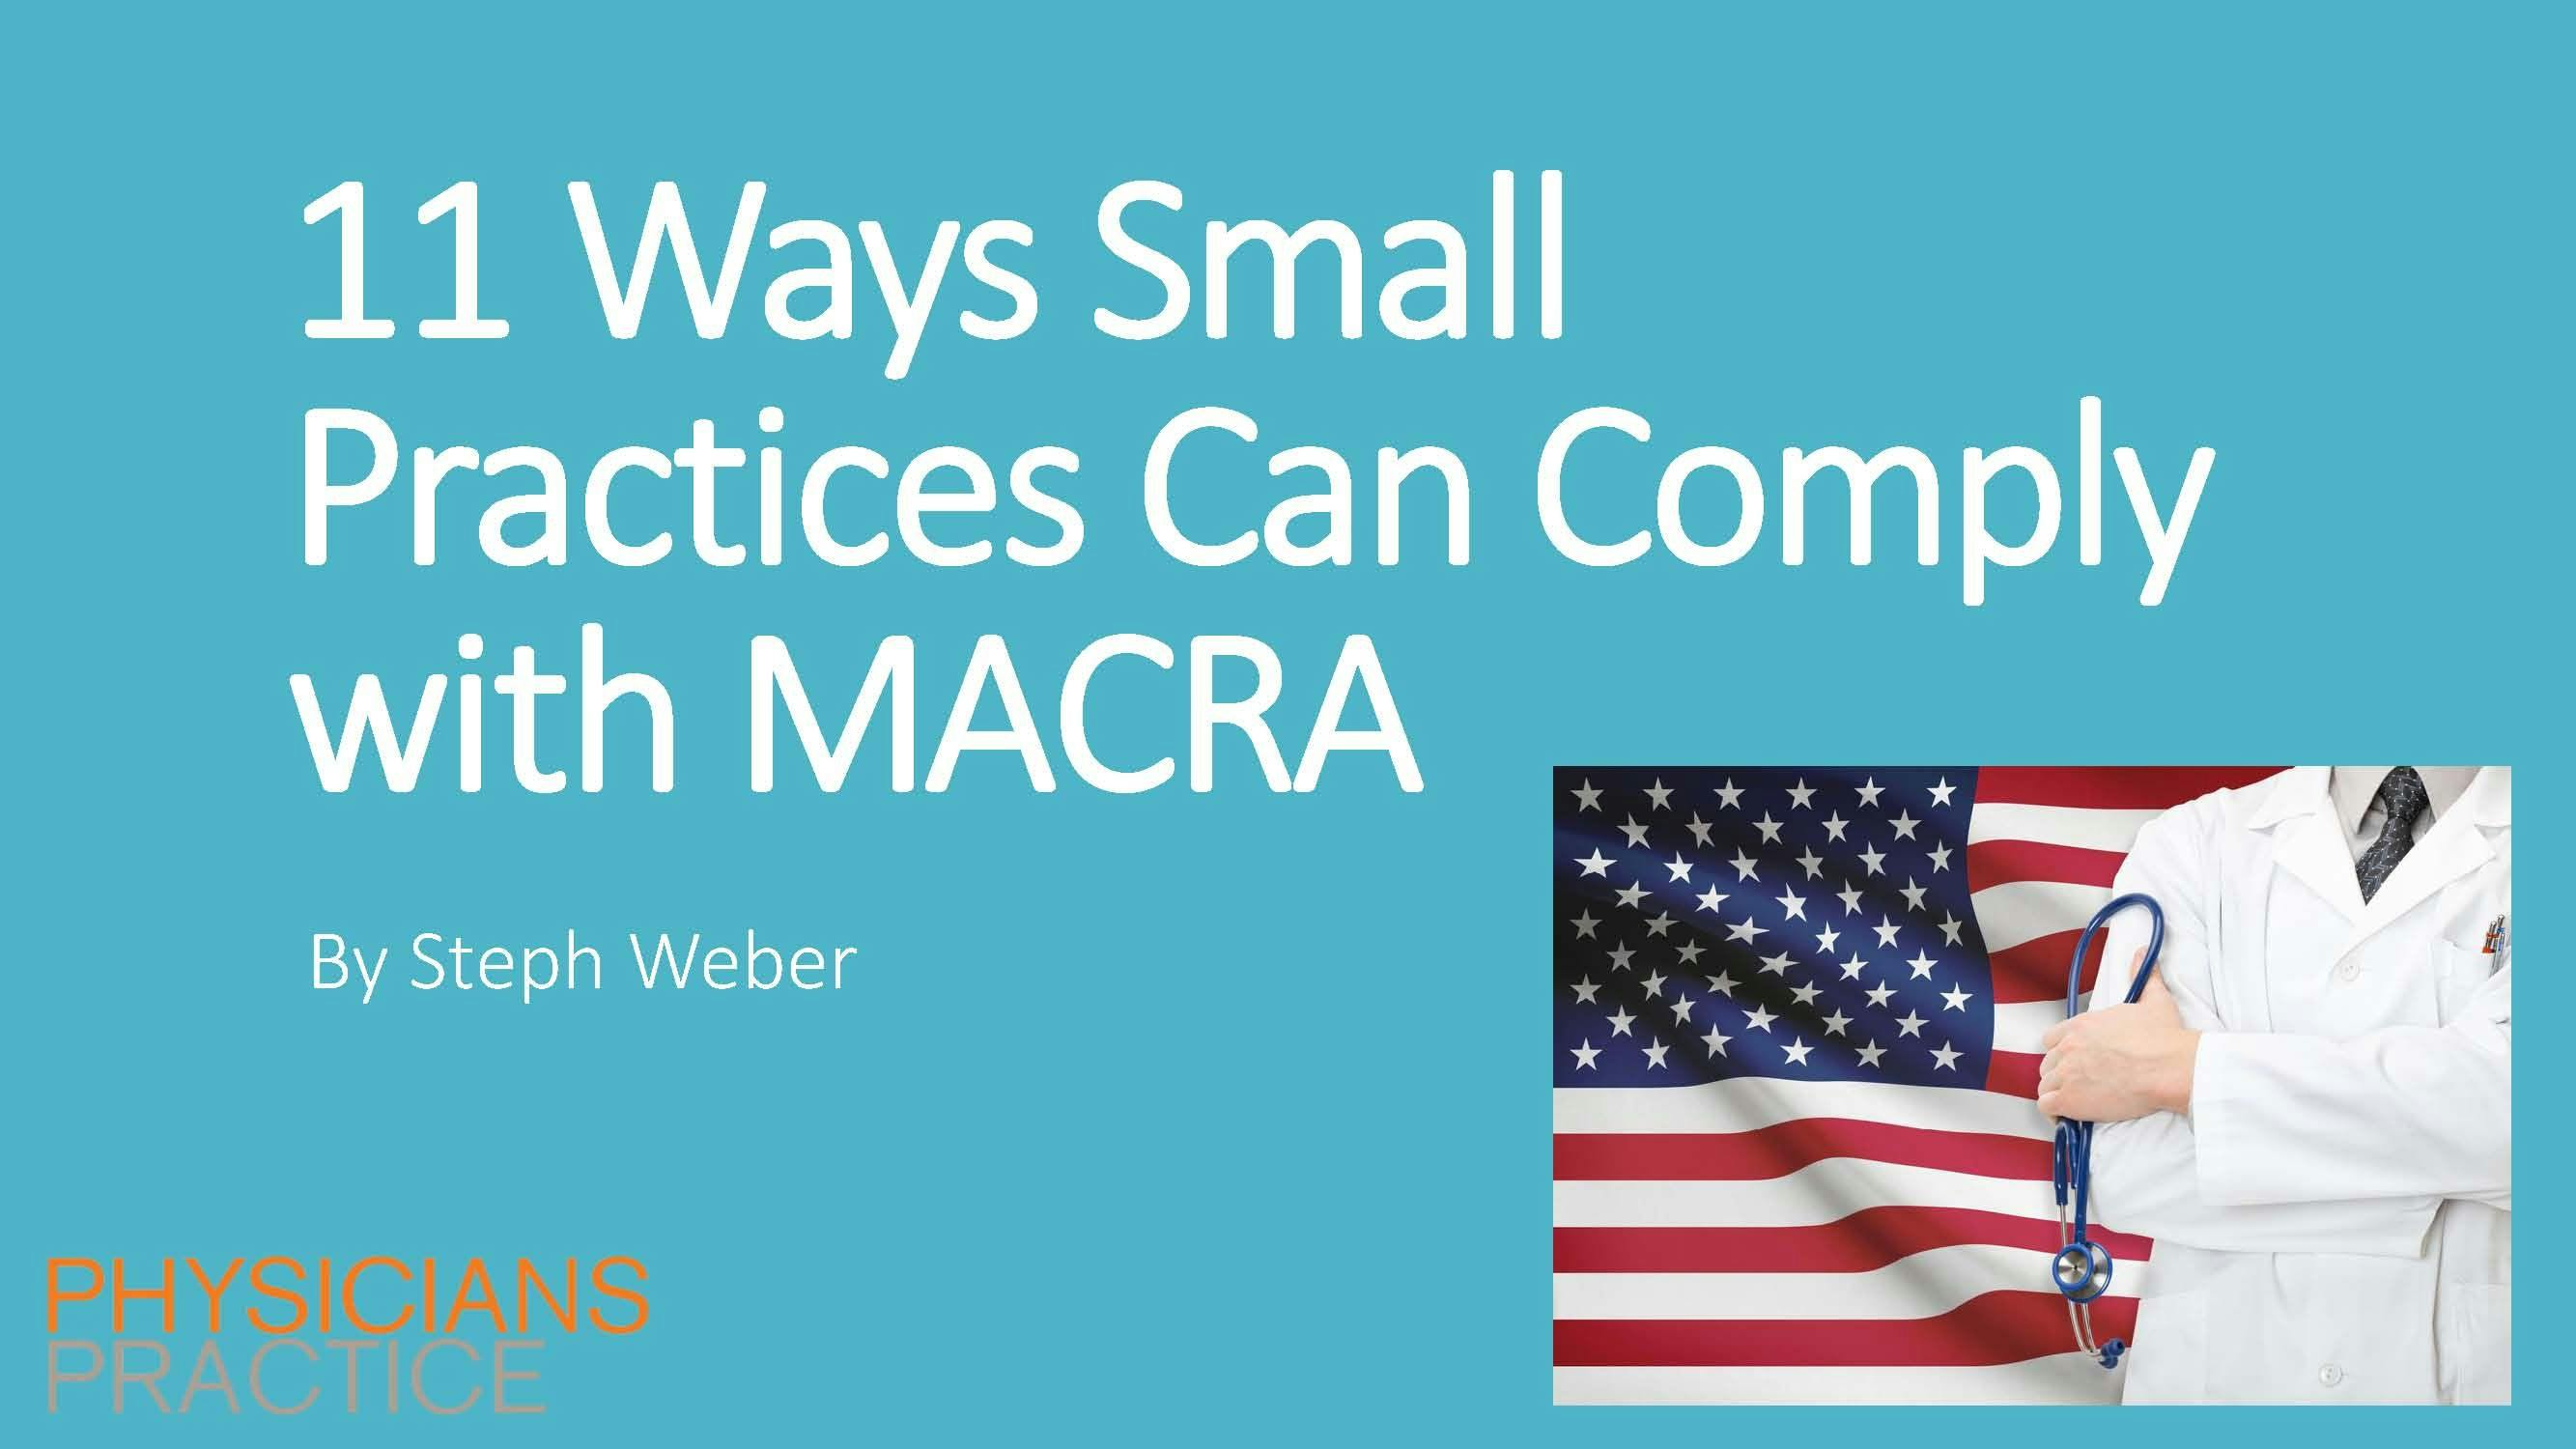 11 Ways Small Practices Can Comply with MACRA